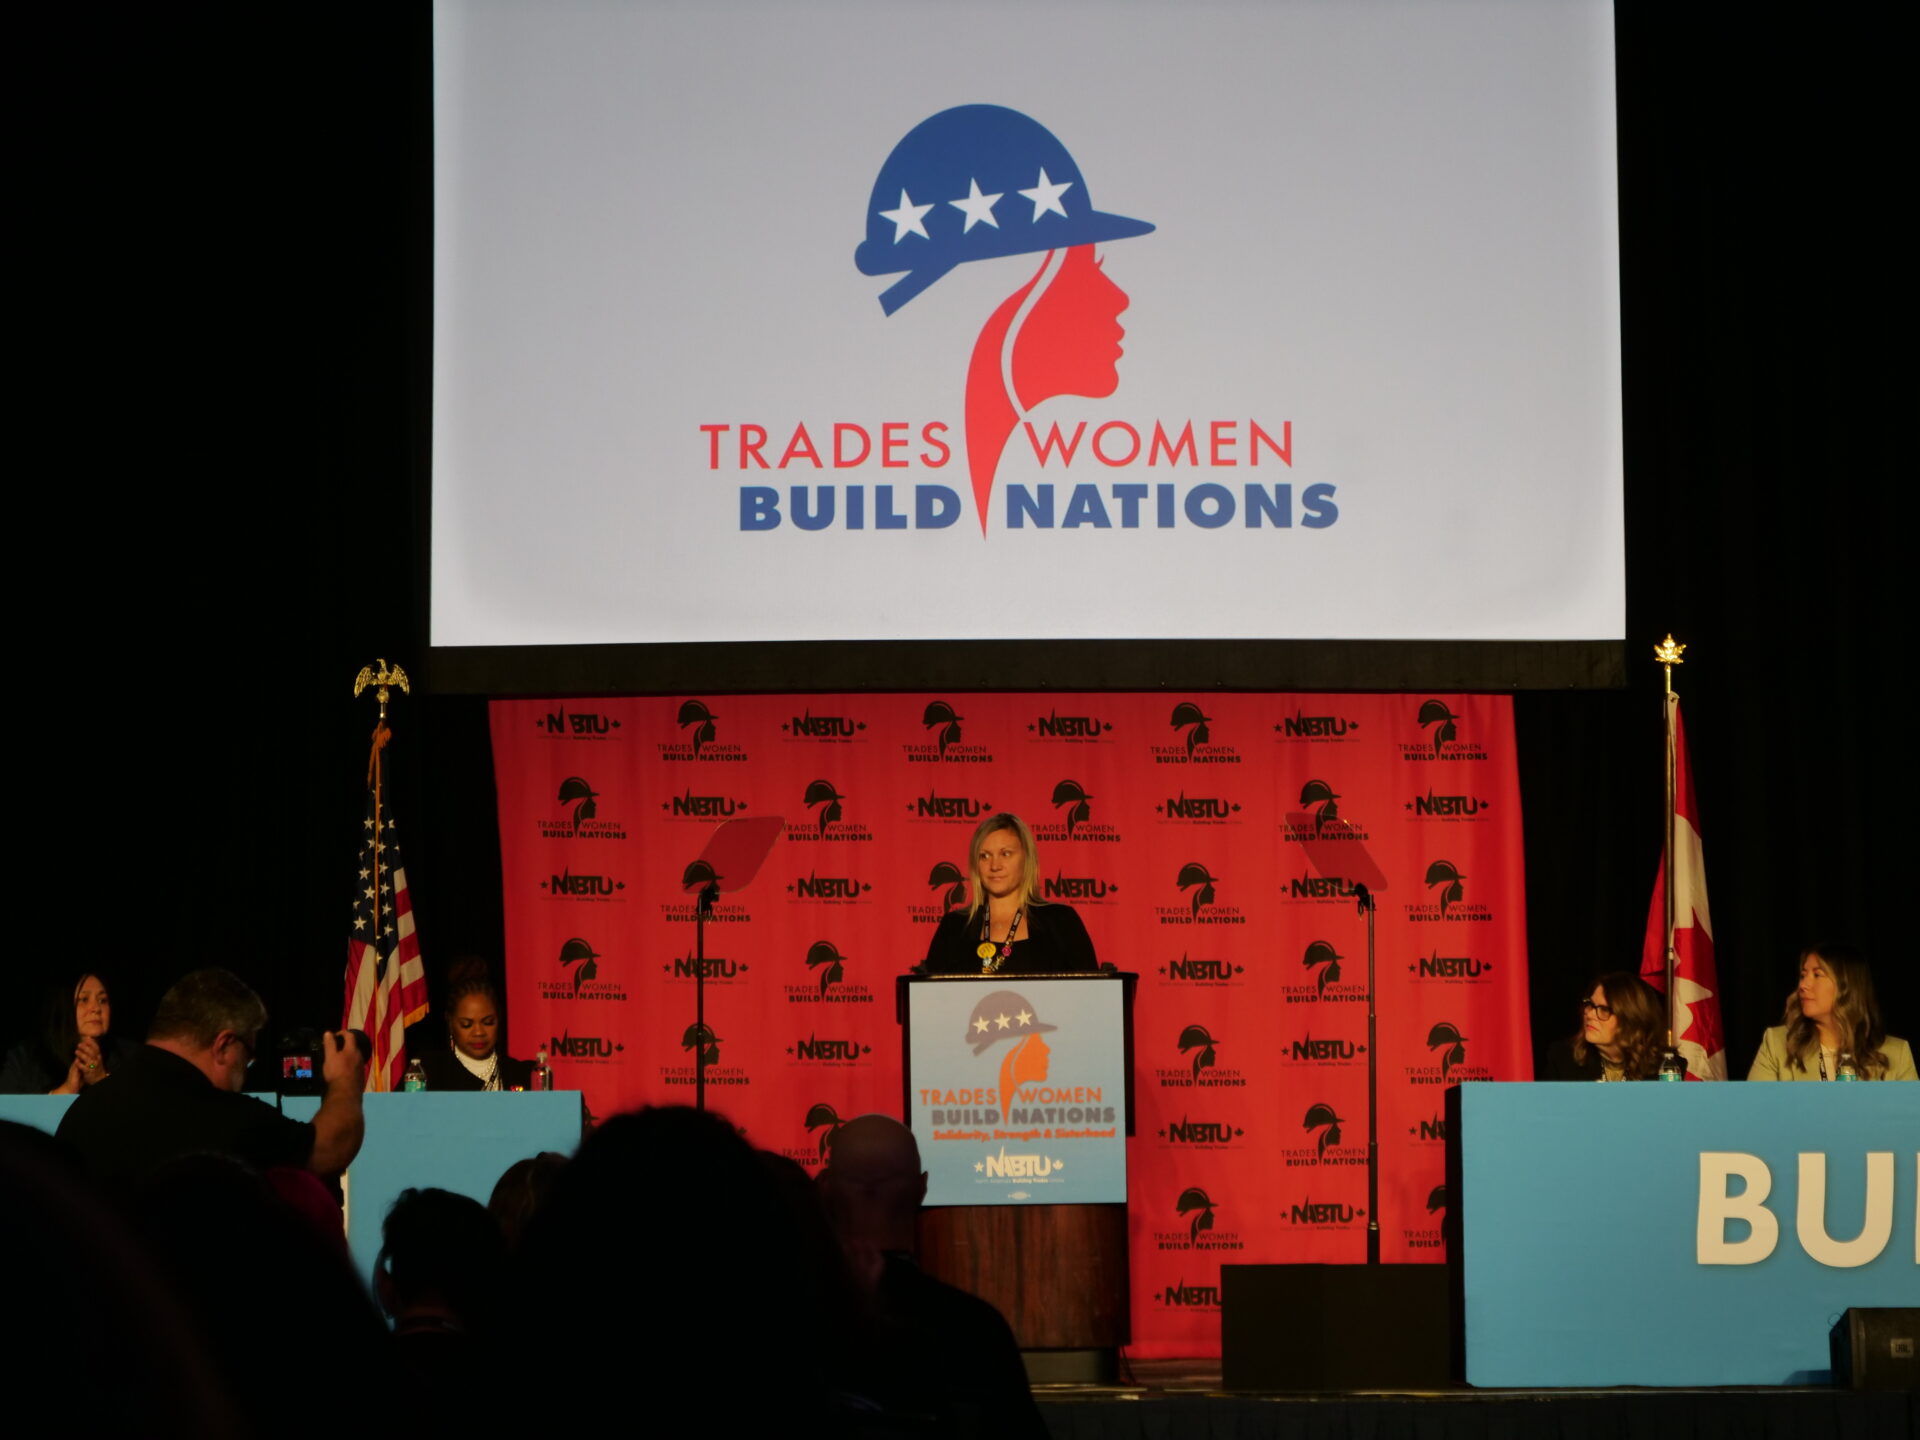 Image from the Gallery: Trades Women Build Nations